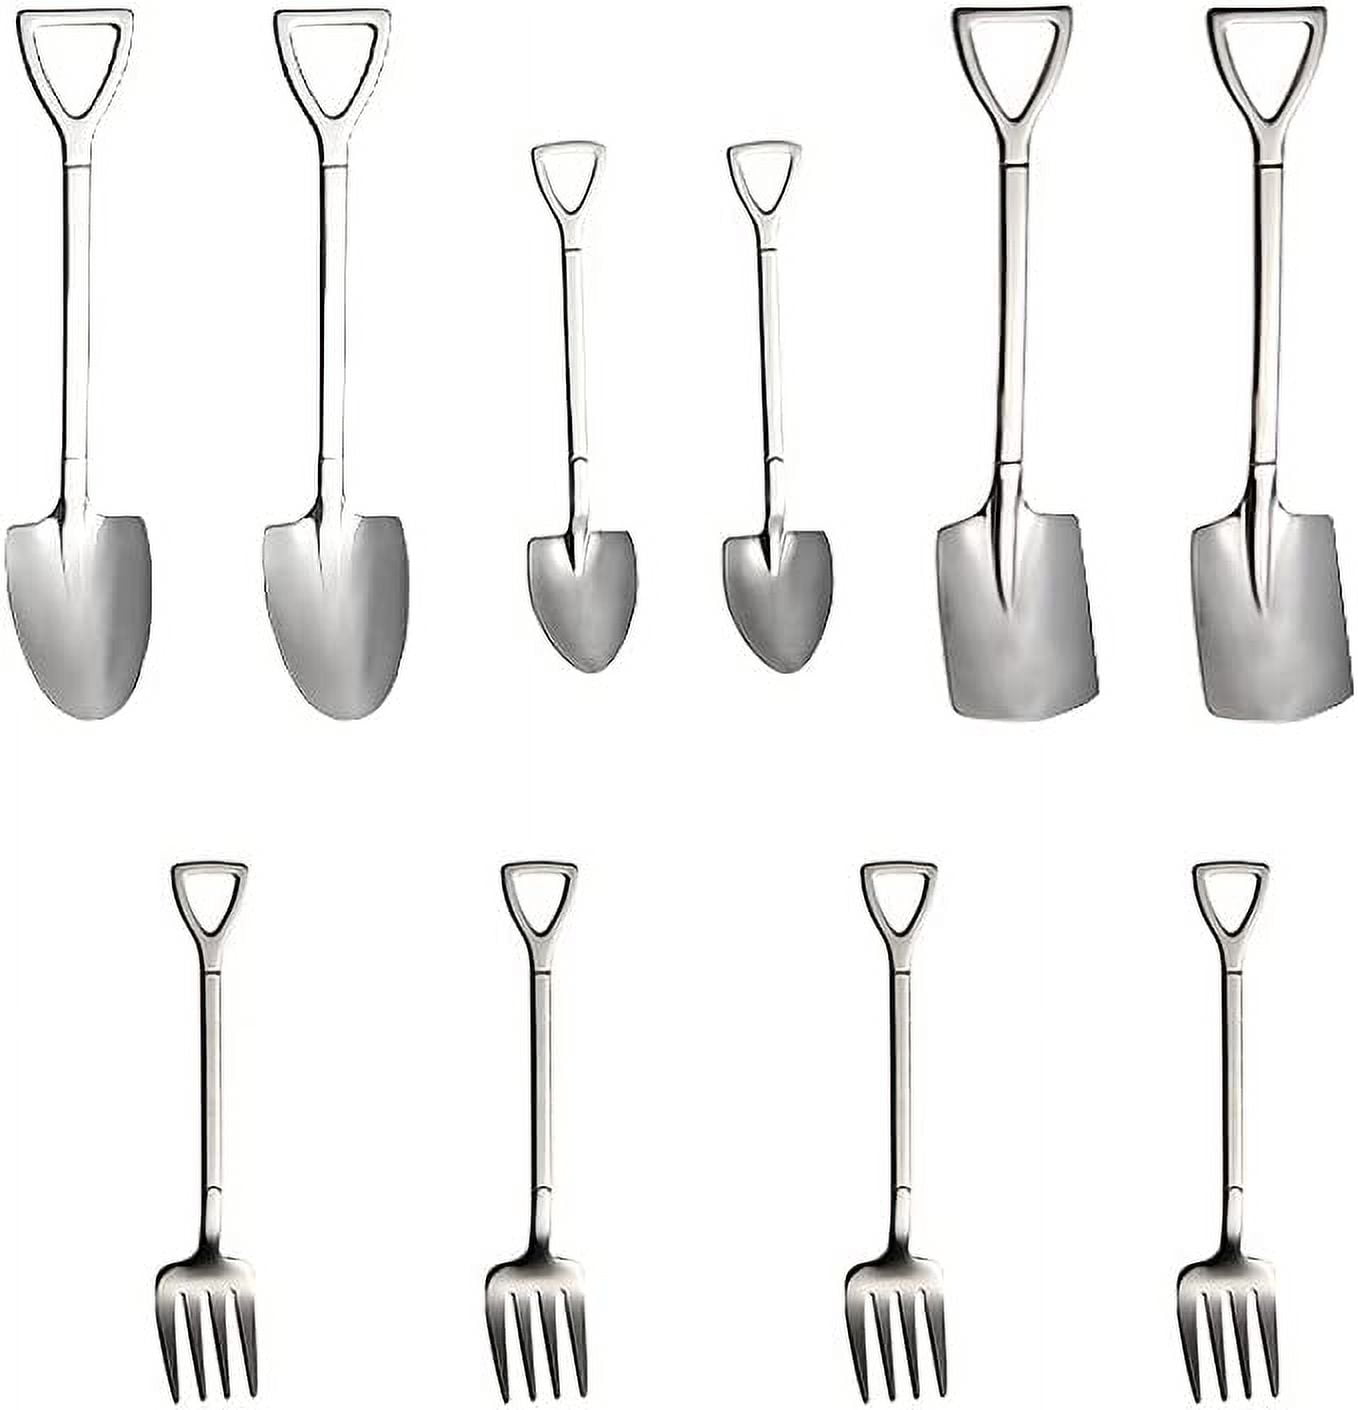 YYZP Tiny Spoons Set of 12, Small Coffee Spoons Mini Stainless Steel Spoons  for Dessert, Appetizer,Ice Cream (4 inch)